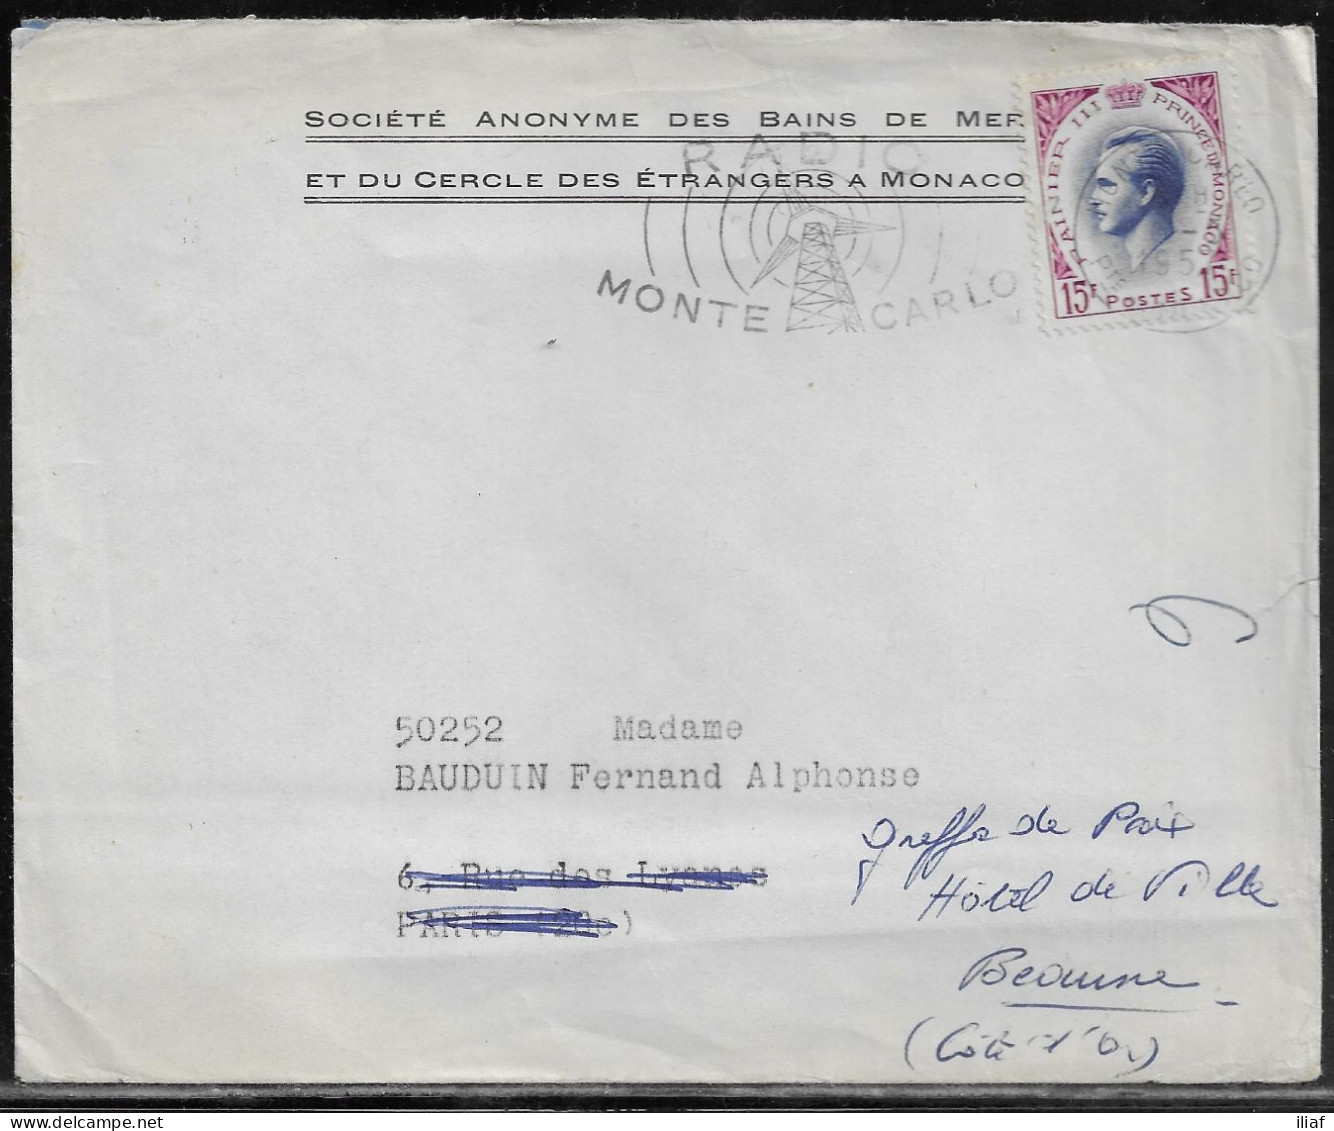 Monaco. Stamps Sc. 337 On Letter, Sent From Monte-Carlo, Monaco On 6.05.1957 To Paris, France, RADIO MONTE CARLO Slogan - Covers & Documents